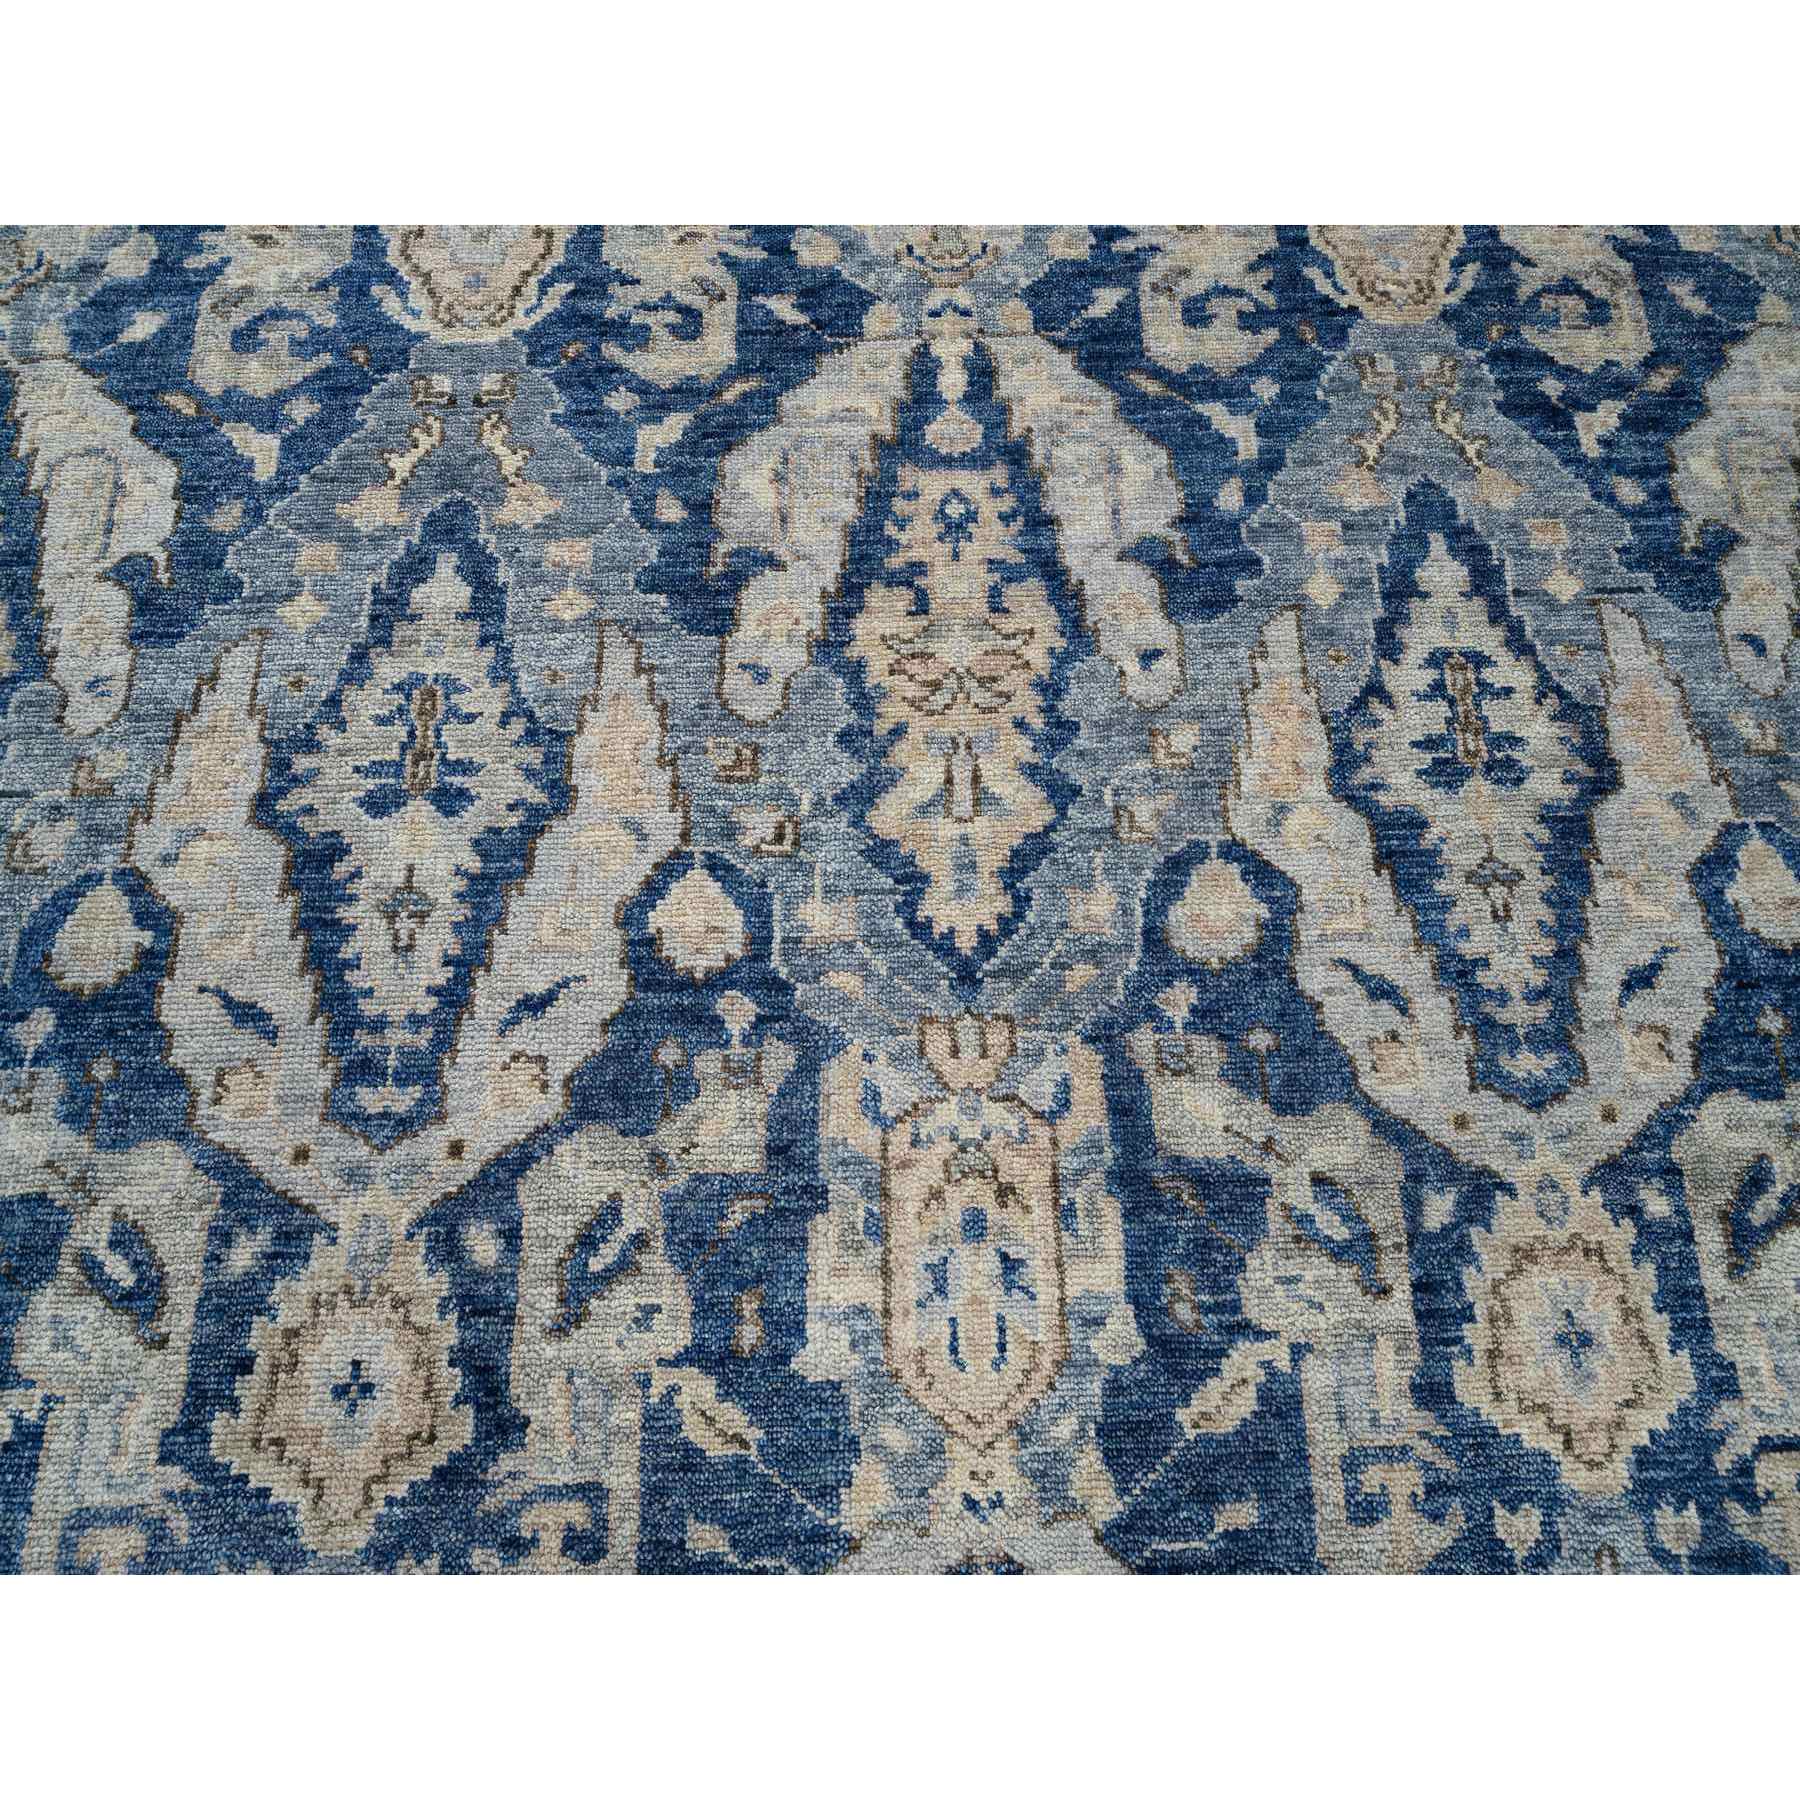 11'10"x14'9" Navy Blue, Hand Woven Oushak with a Serrated Reversed Leaf Design, Pure Wool Supple Collection, Oversized Oriental Rug 